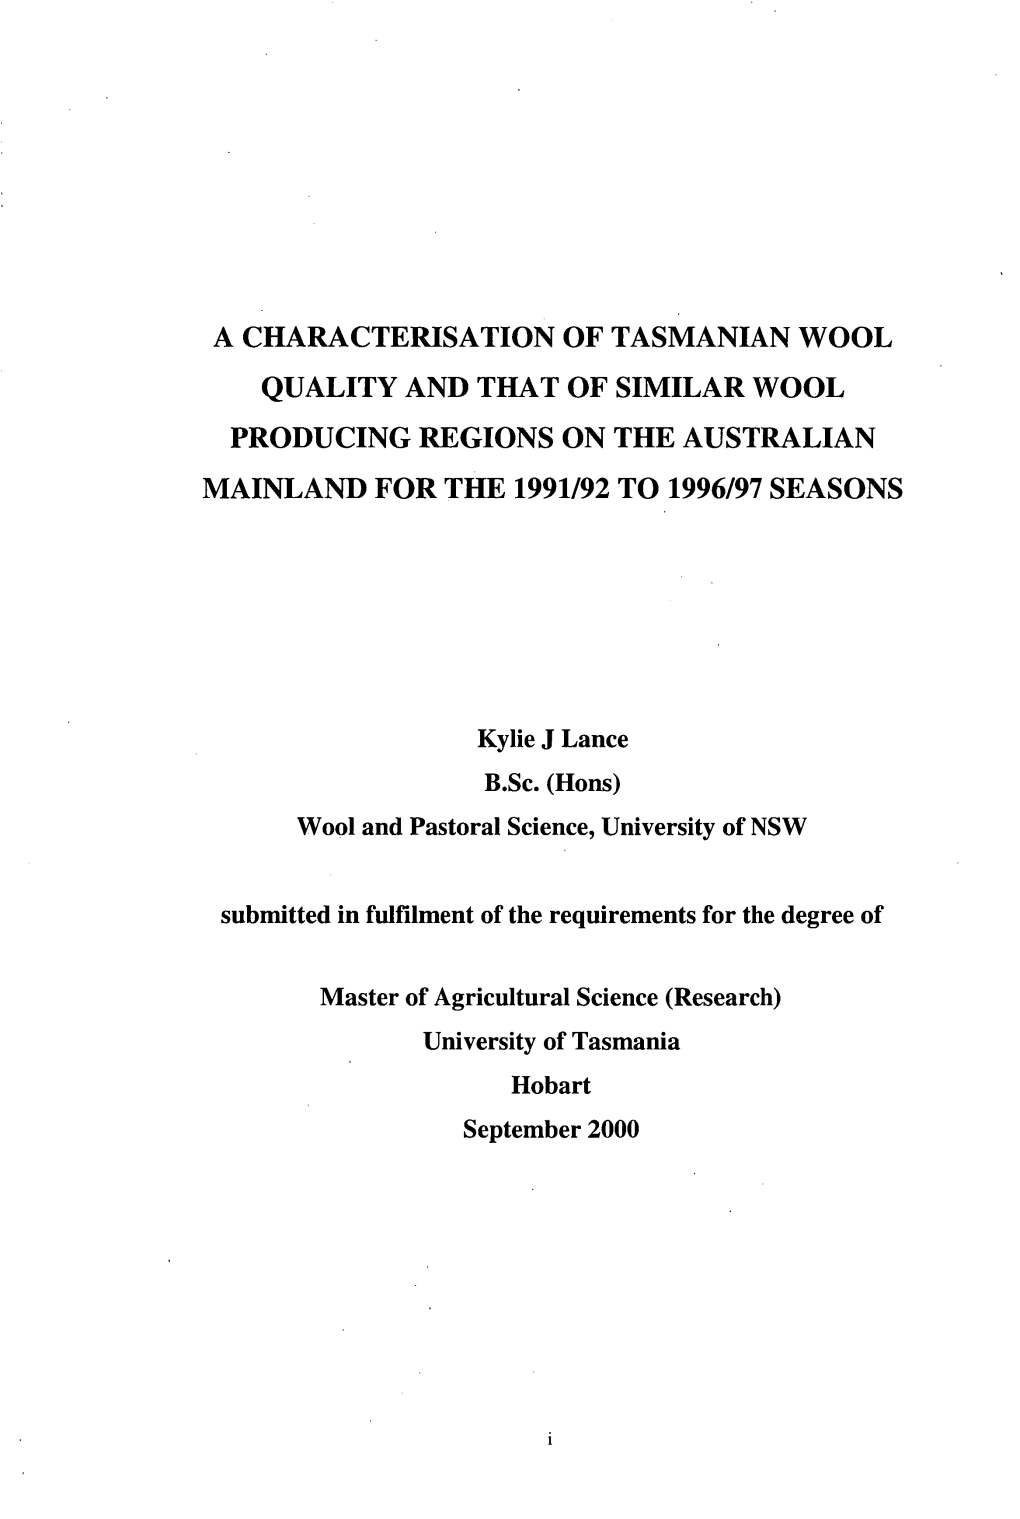 A Characterisation of Tasmanian Wool Quality and That of Similar Wool Producing Regions on the Australian Mainland for the 1991/92 to 1996/97 Seasons